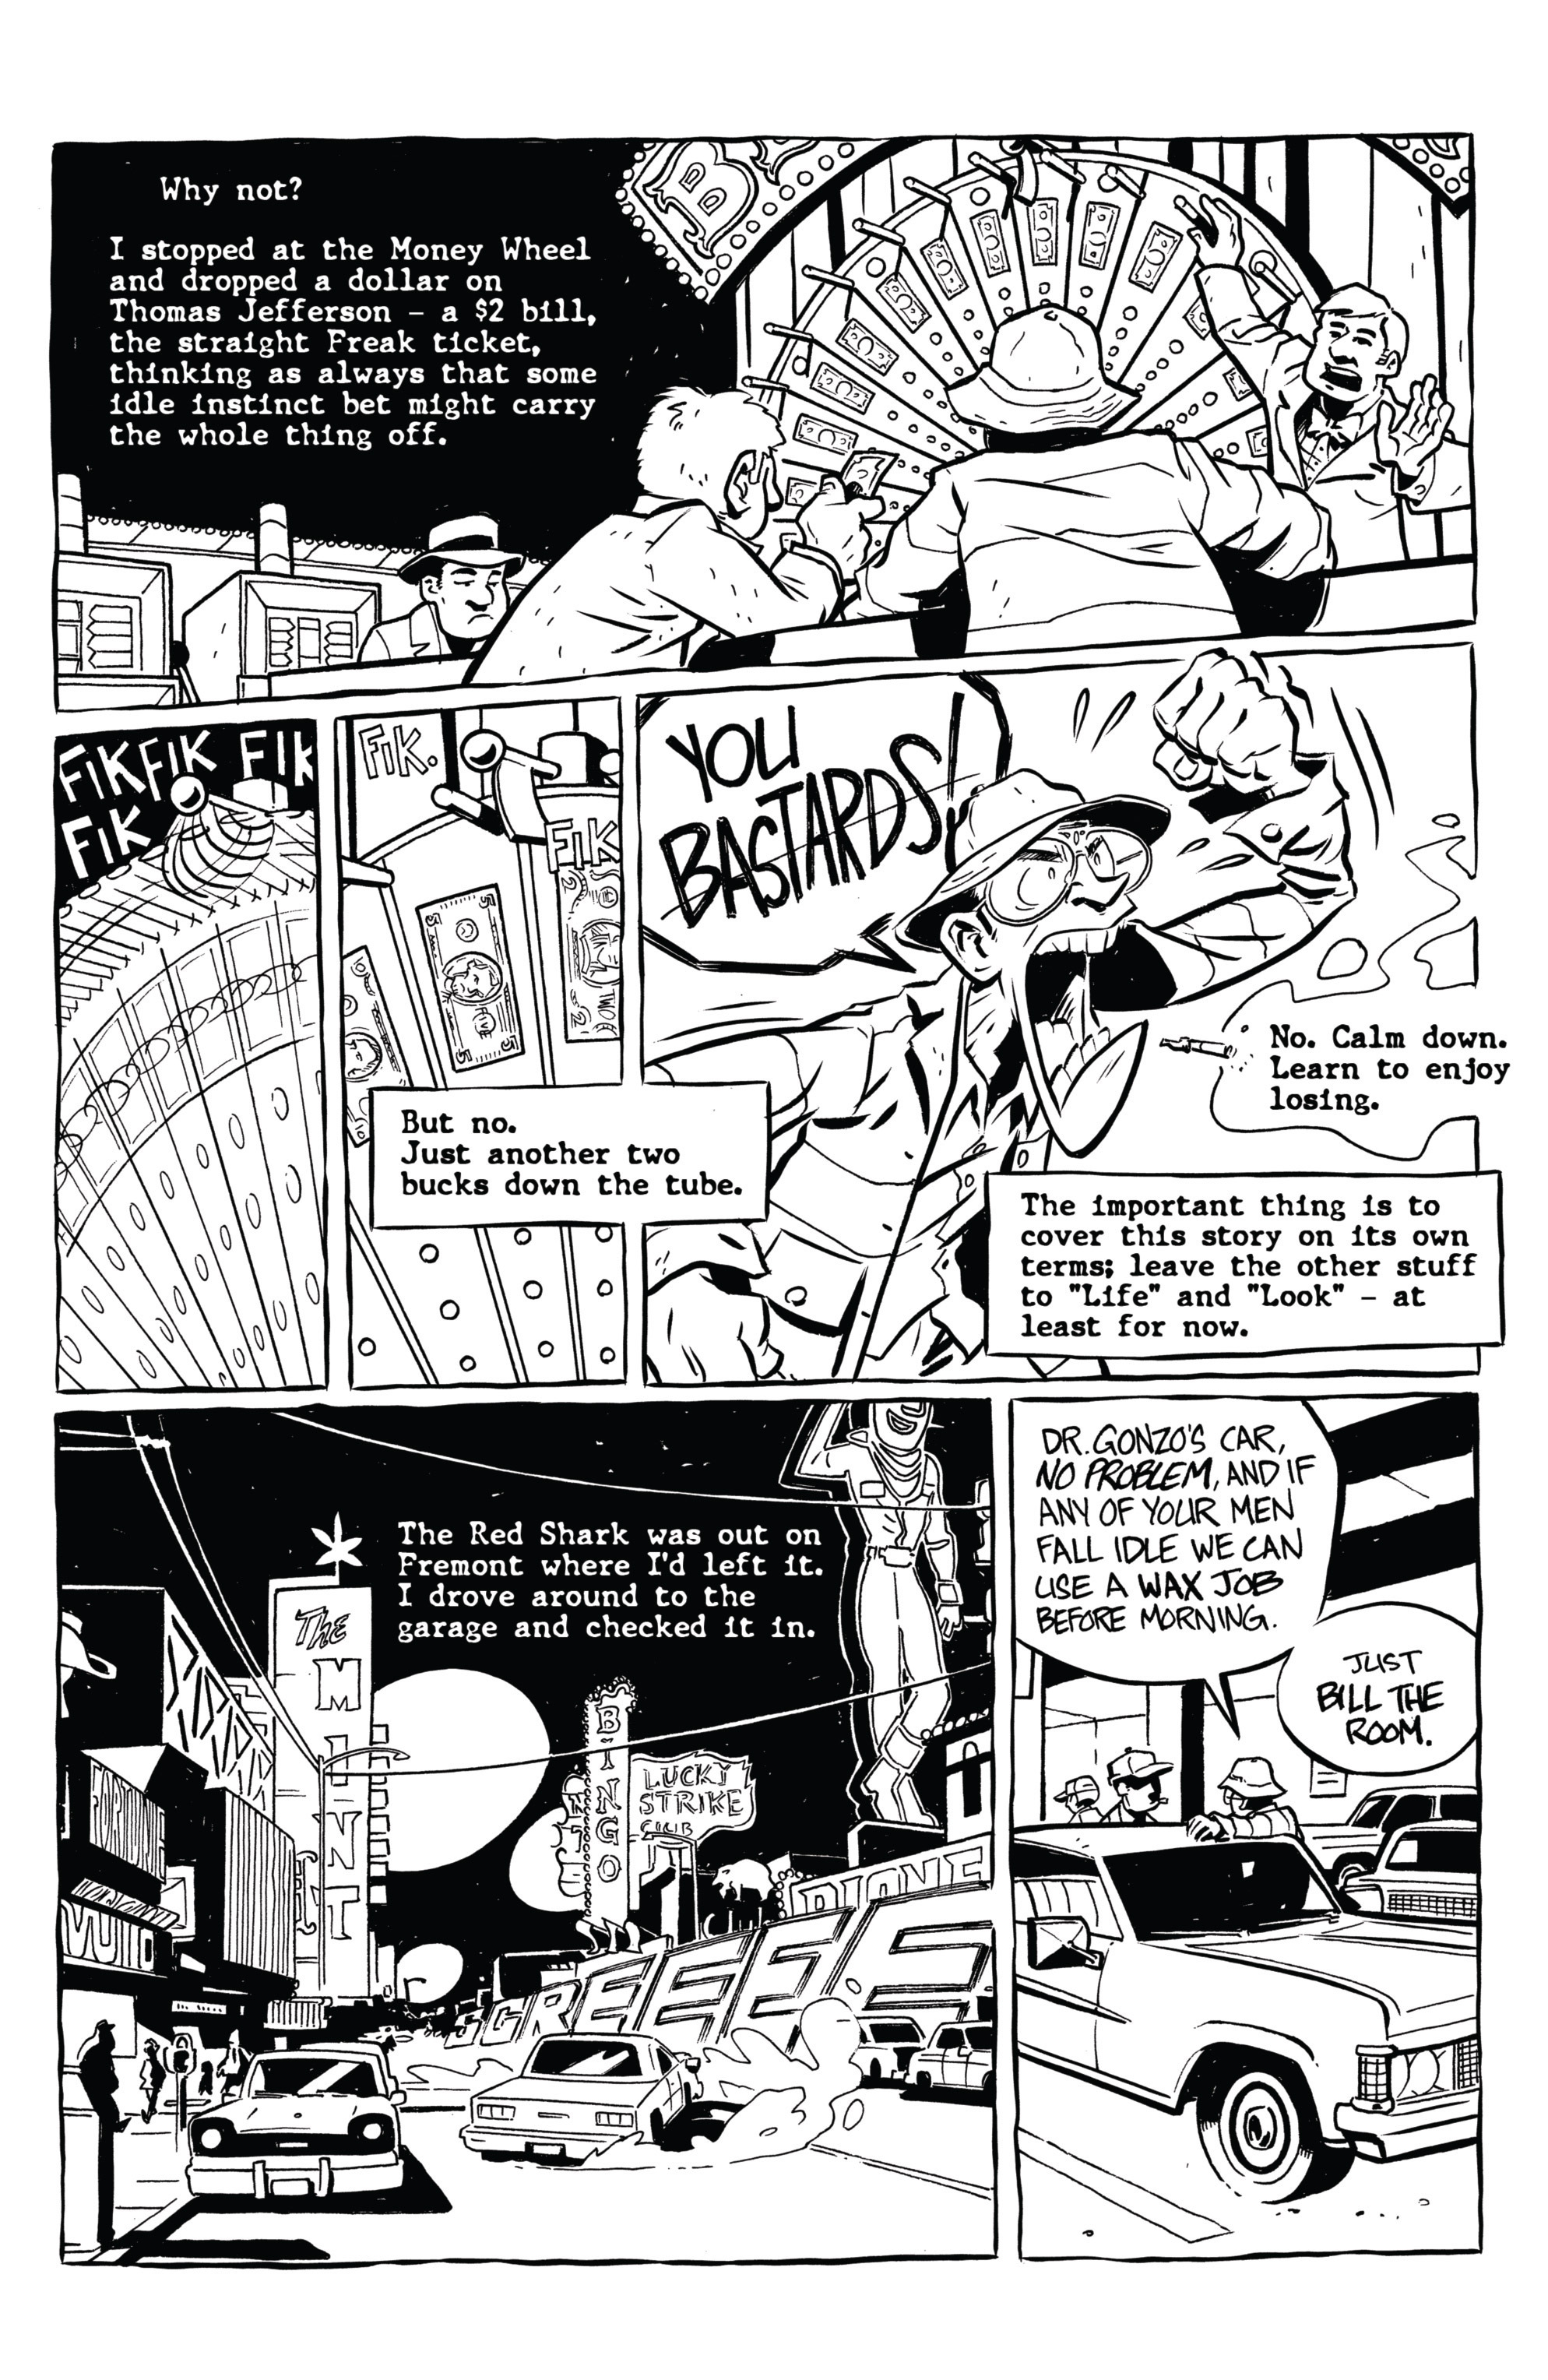 Read online Hunter S. Thompson's Fear and Loathing in Las Vegas comic -  Issue #2 - 22